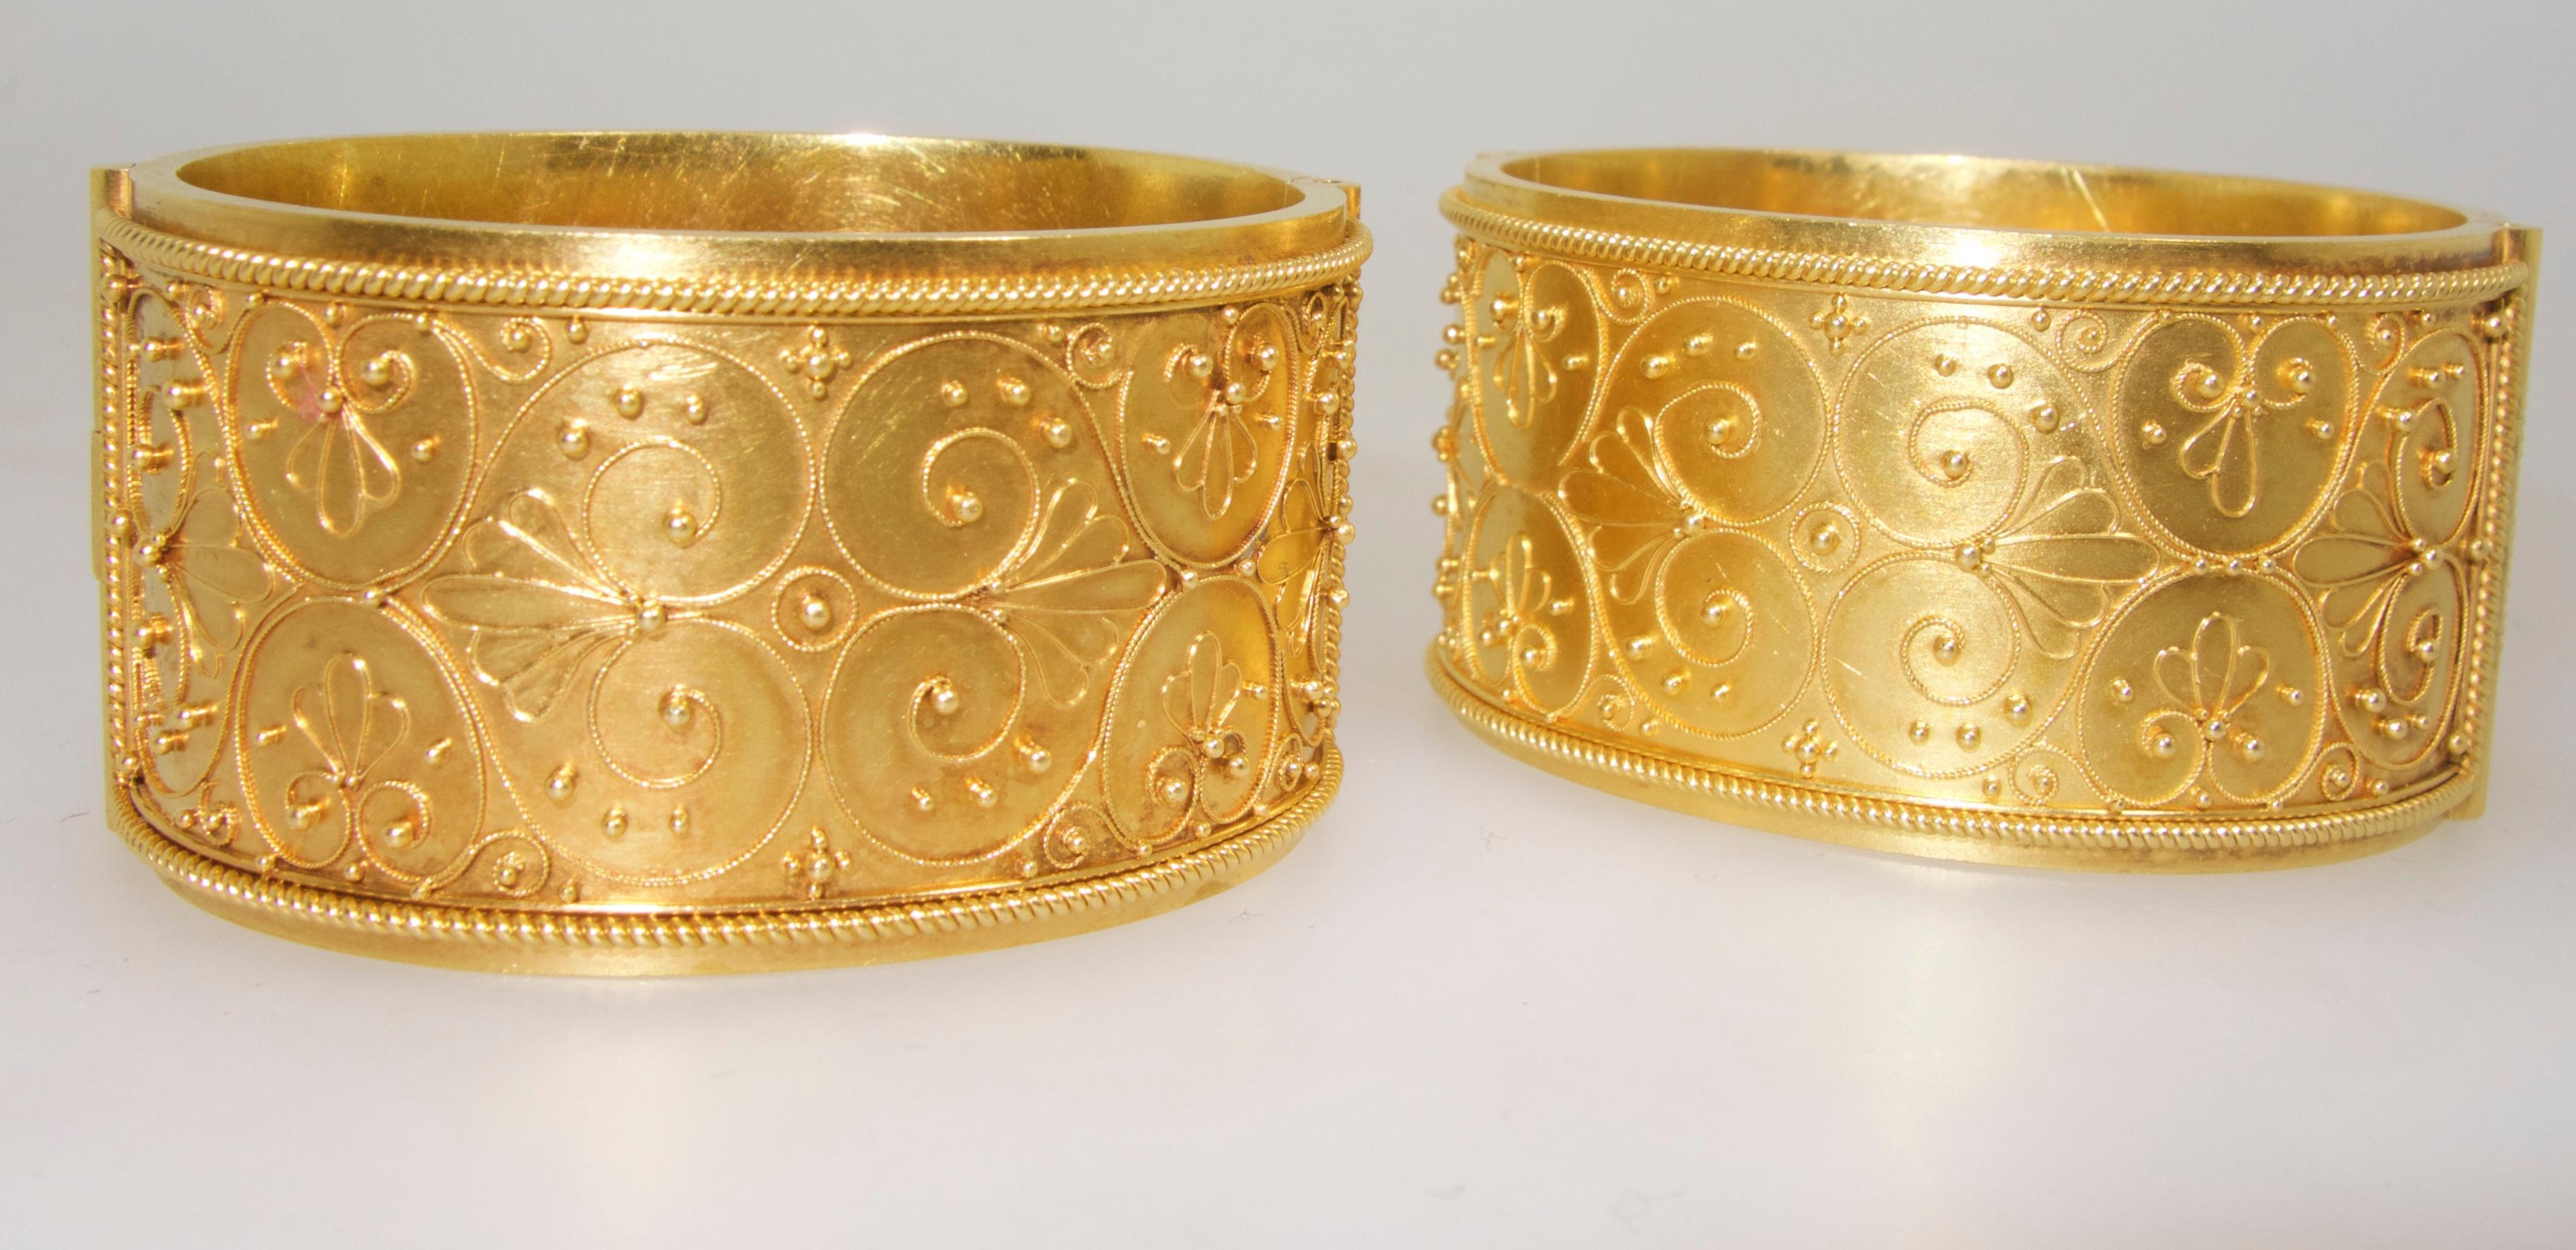 Antique bracelets with excellent example of Etruscan revival gold work.  Probably made for a young girl as the inner circumference is 5 7/8 inches.  The width of each bangle is 1 1/8 inches.  Condition we would rate as very good.  A very slight